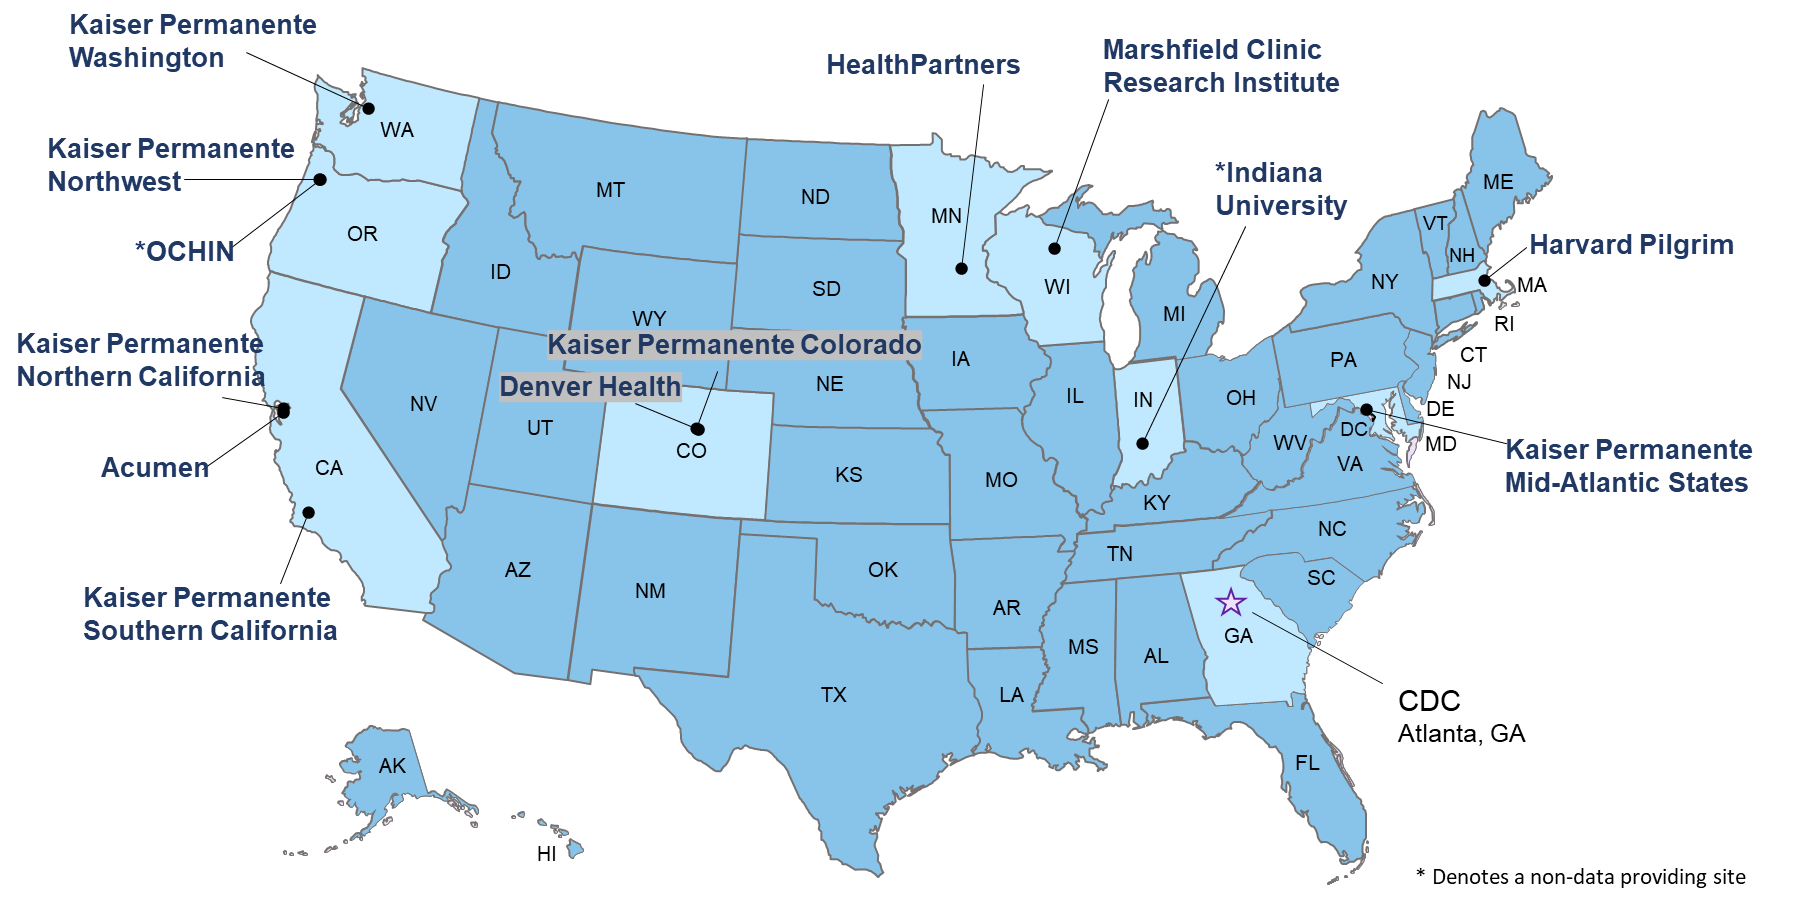 Participating VSD Healthcare Organizations in the US Map